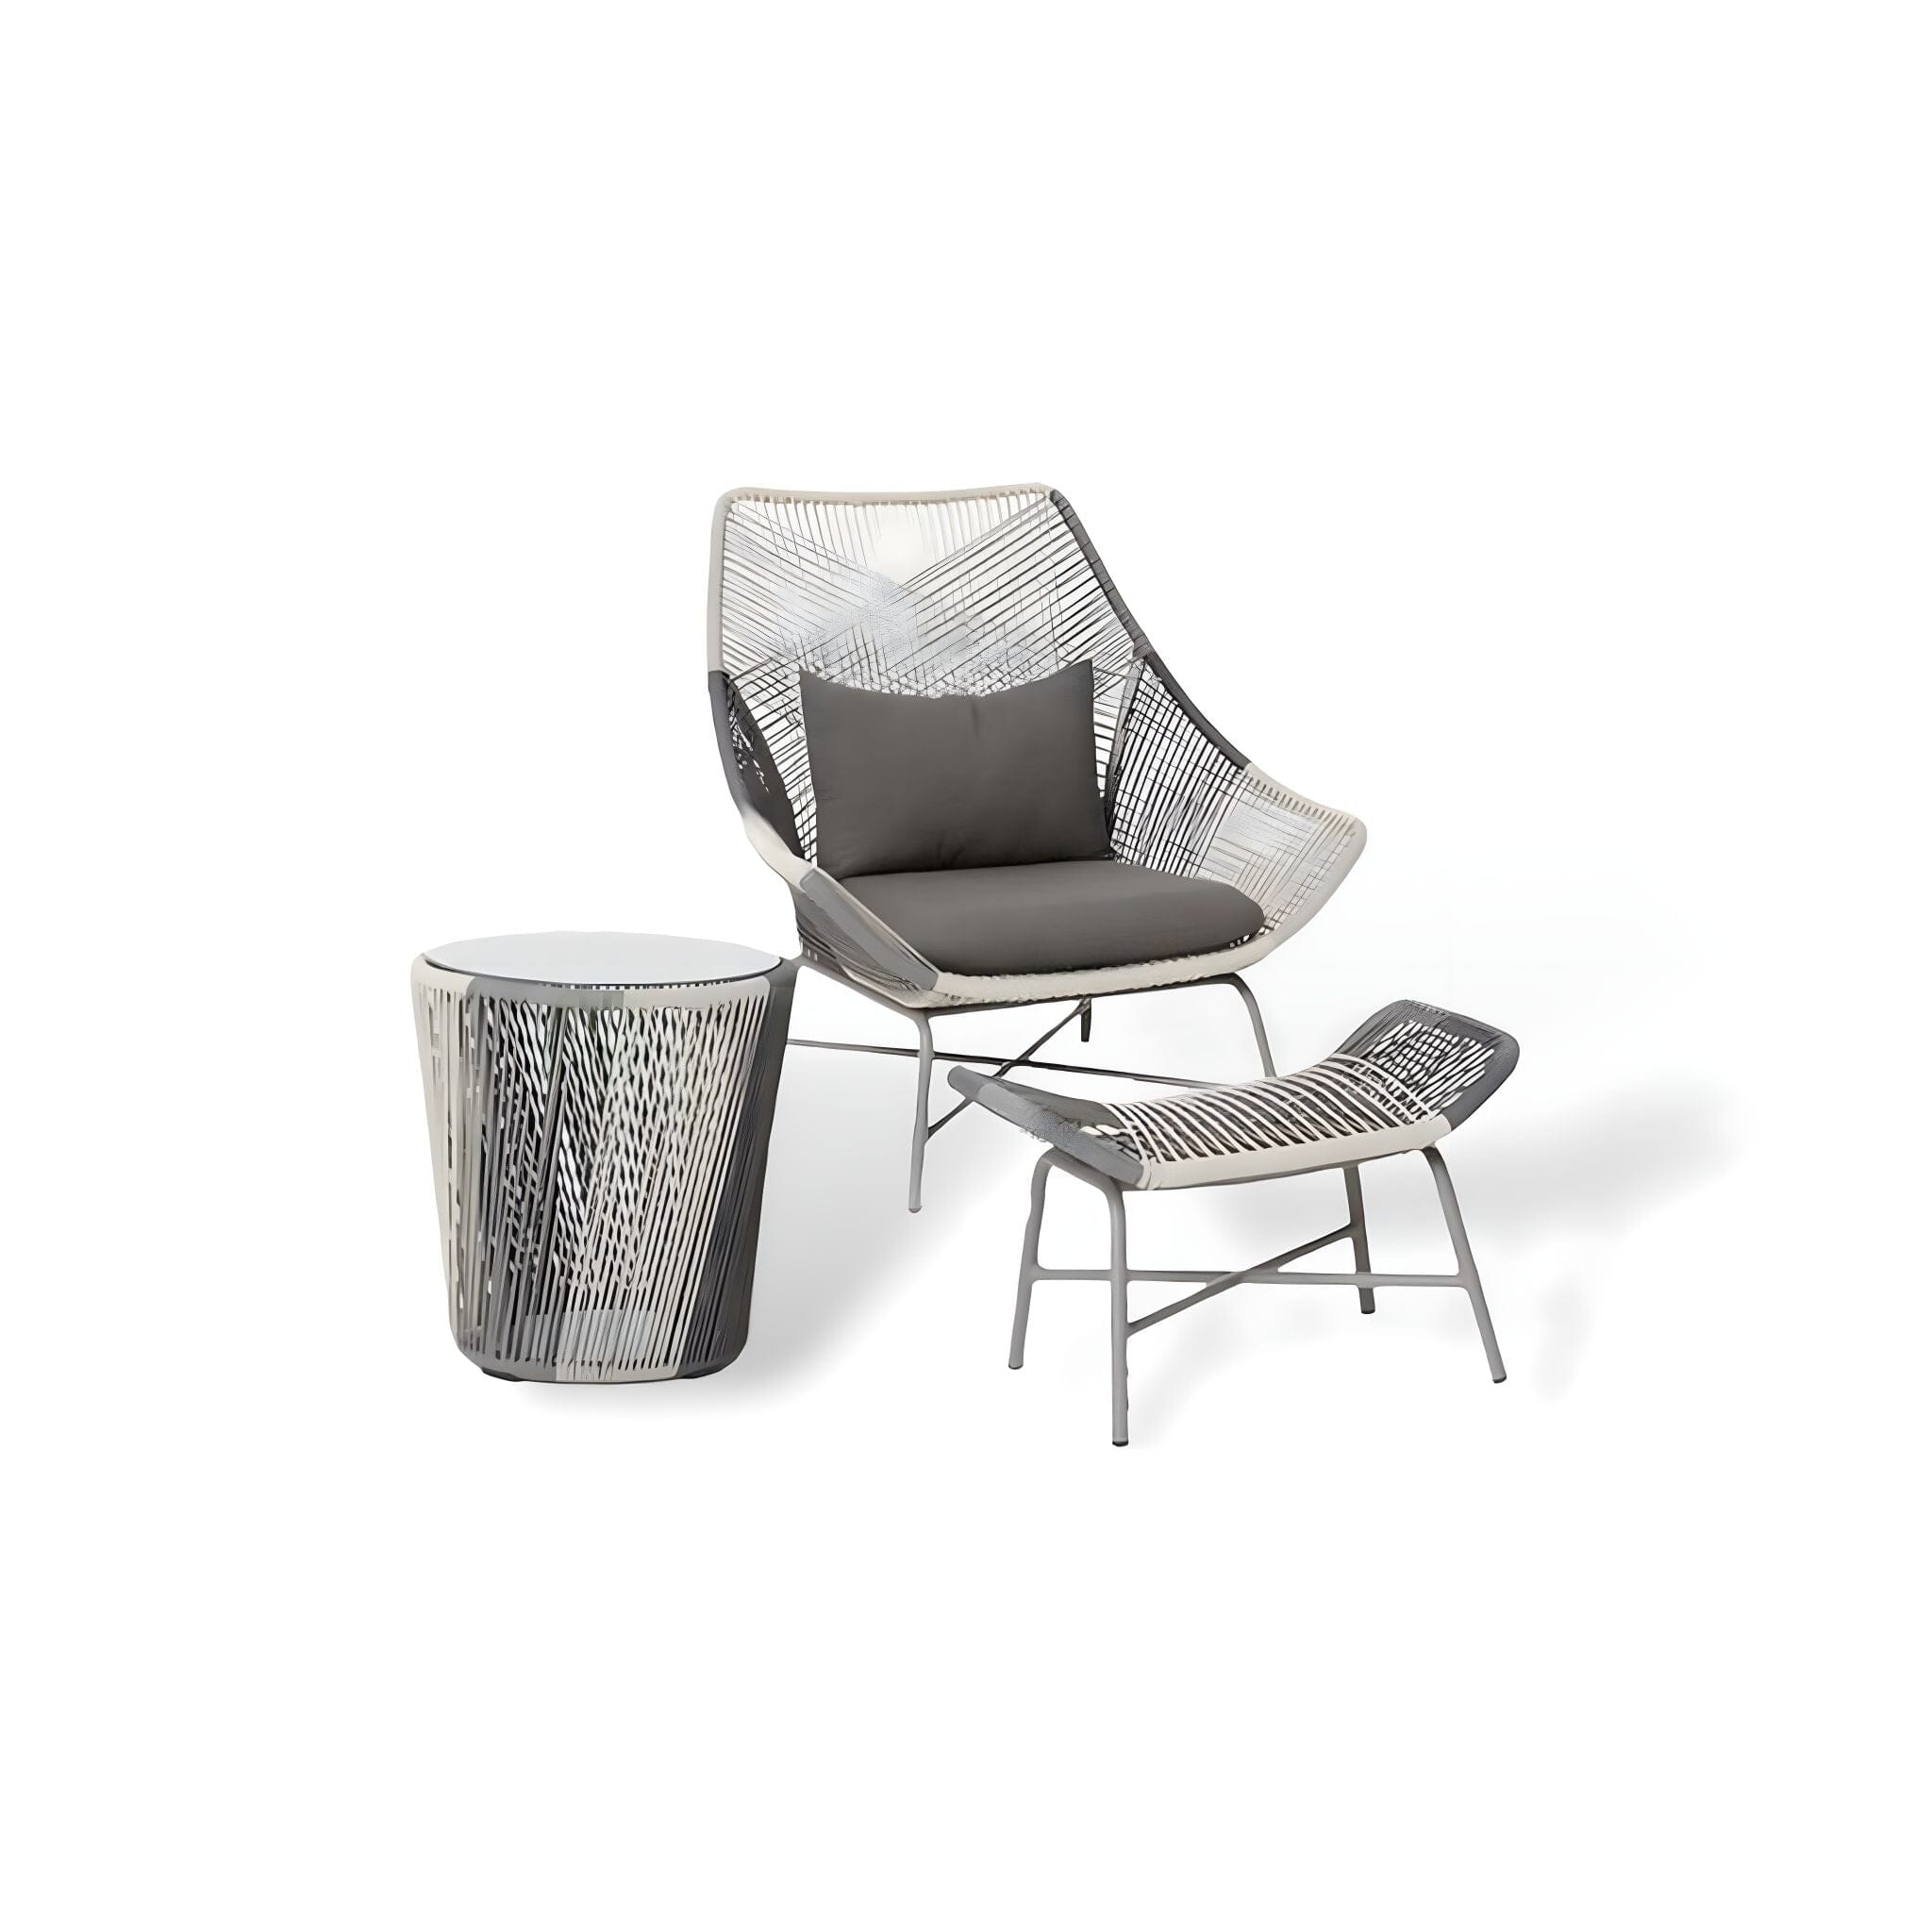 Backyard Bliss Collection Outdoor Furniture 1 x Chair (inc foot petal) + Side Table 